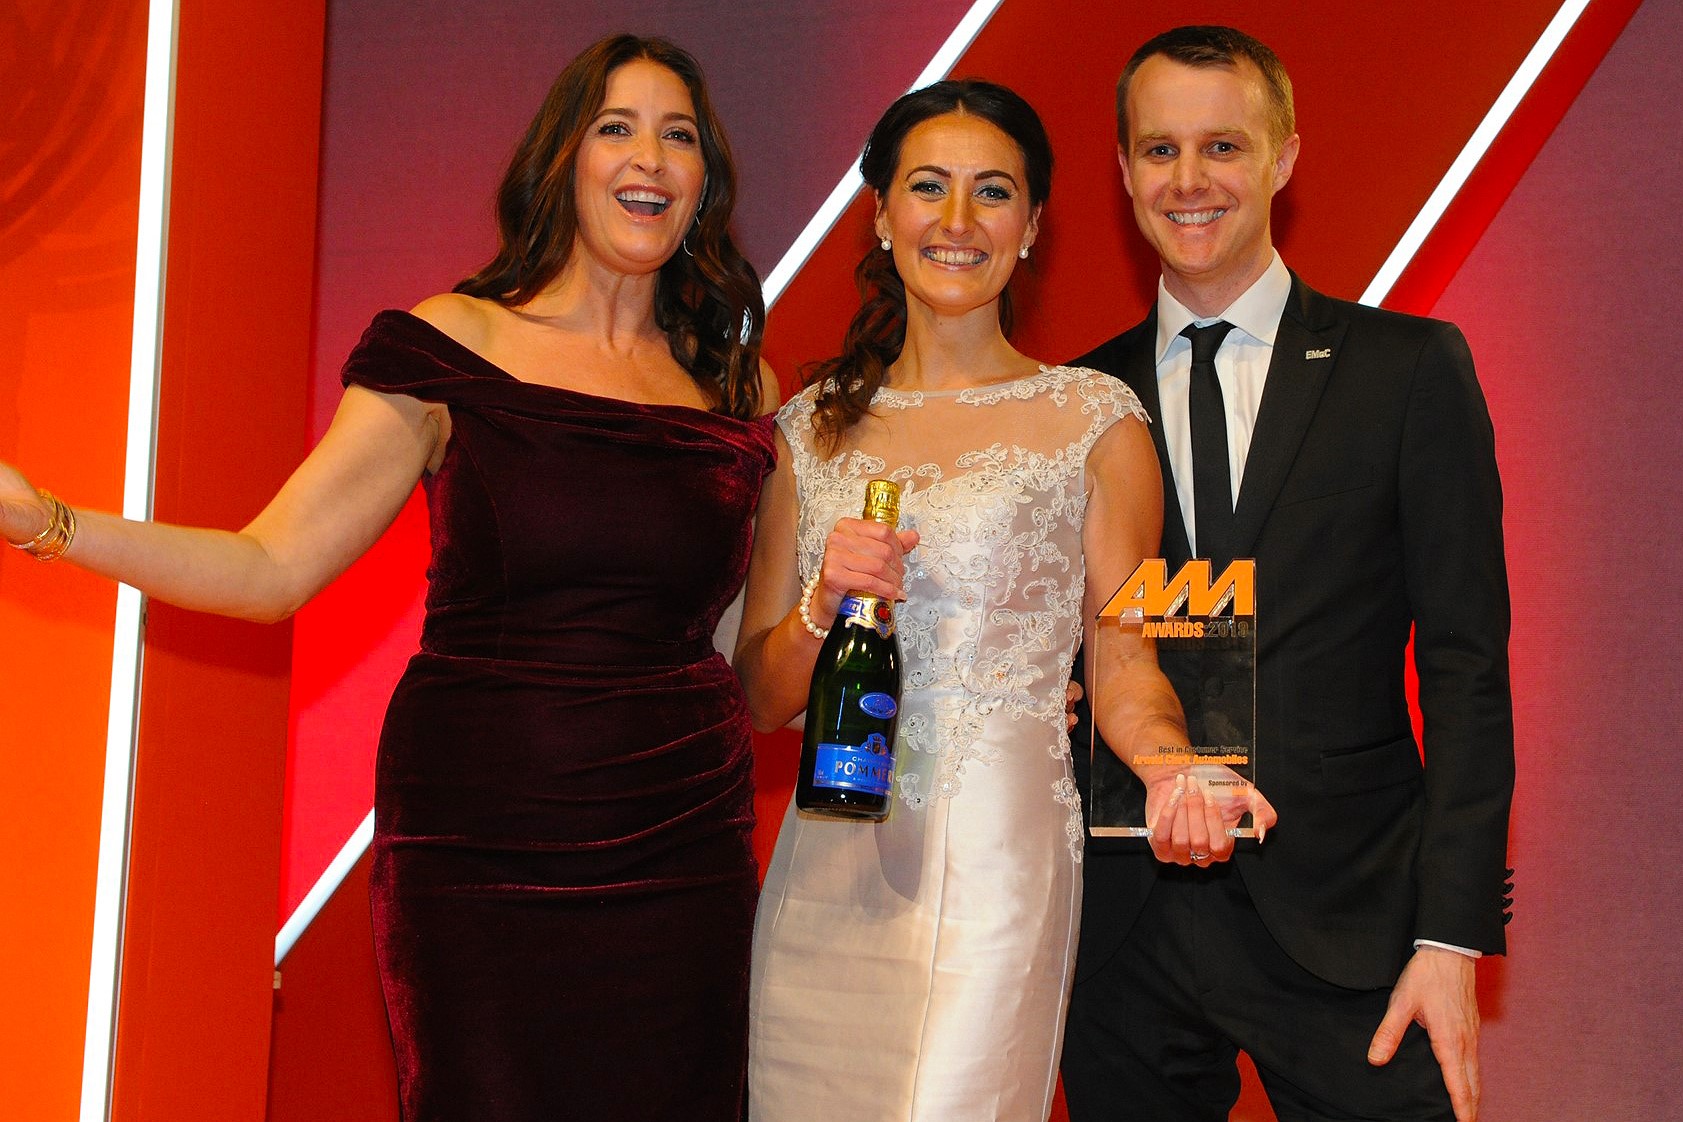 Beth Jones, Arnold Clark Automobiles,  accepts the award from Liam Finney, head of commercial partners, EMaC, right and host Lisa Snowdon right